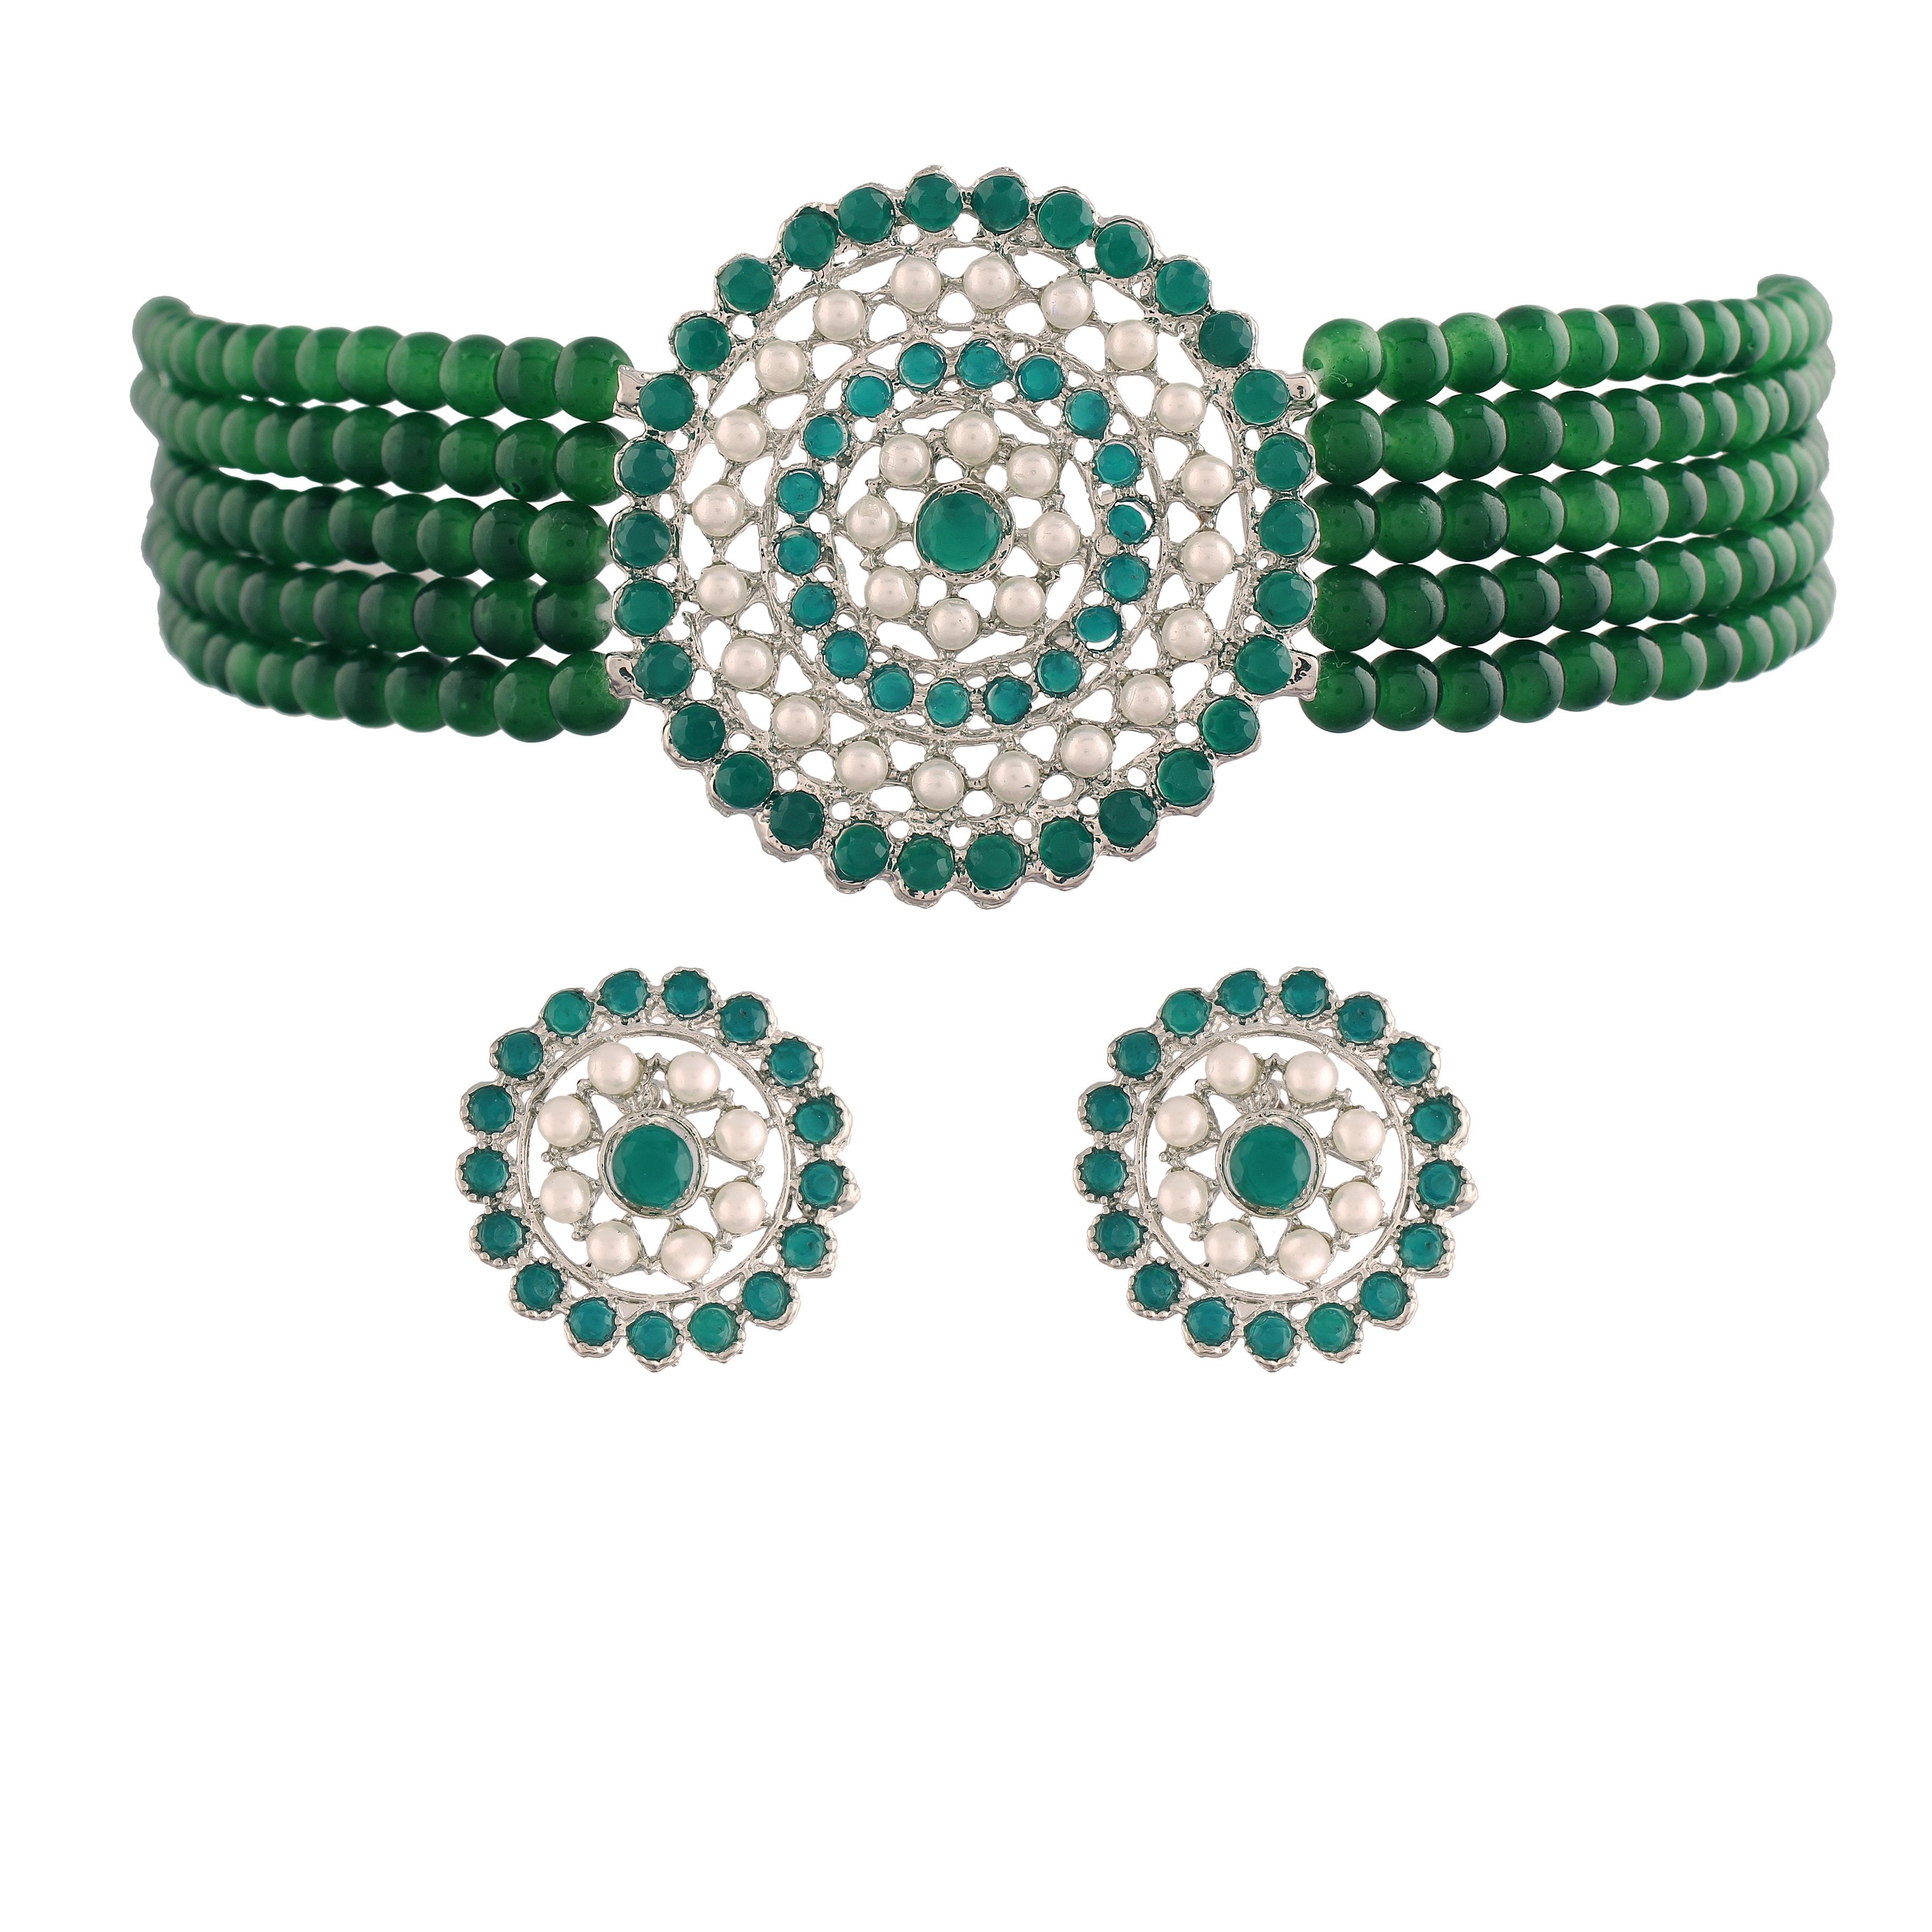 Women's Rhodium Plated Green Light Weight Pearl Beaded Choker Necklace Set - i jewels